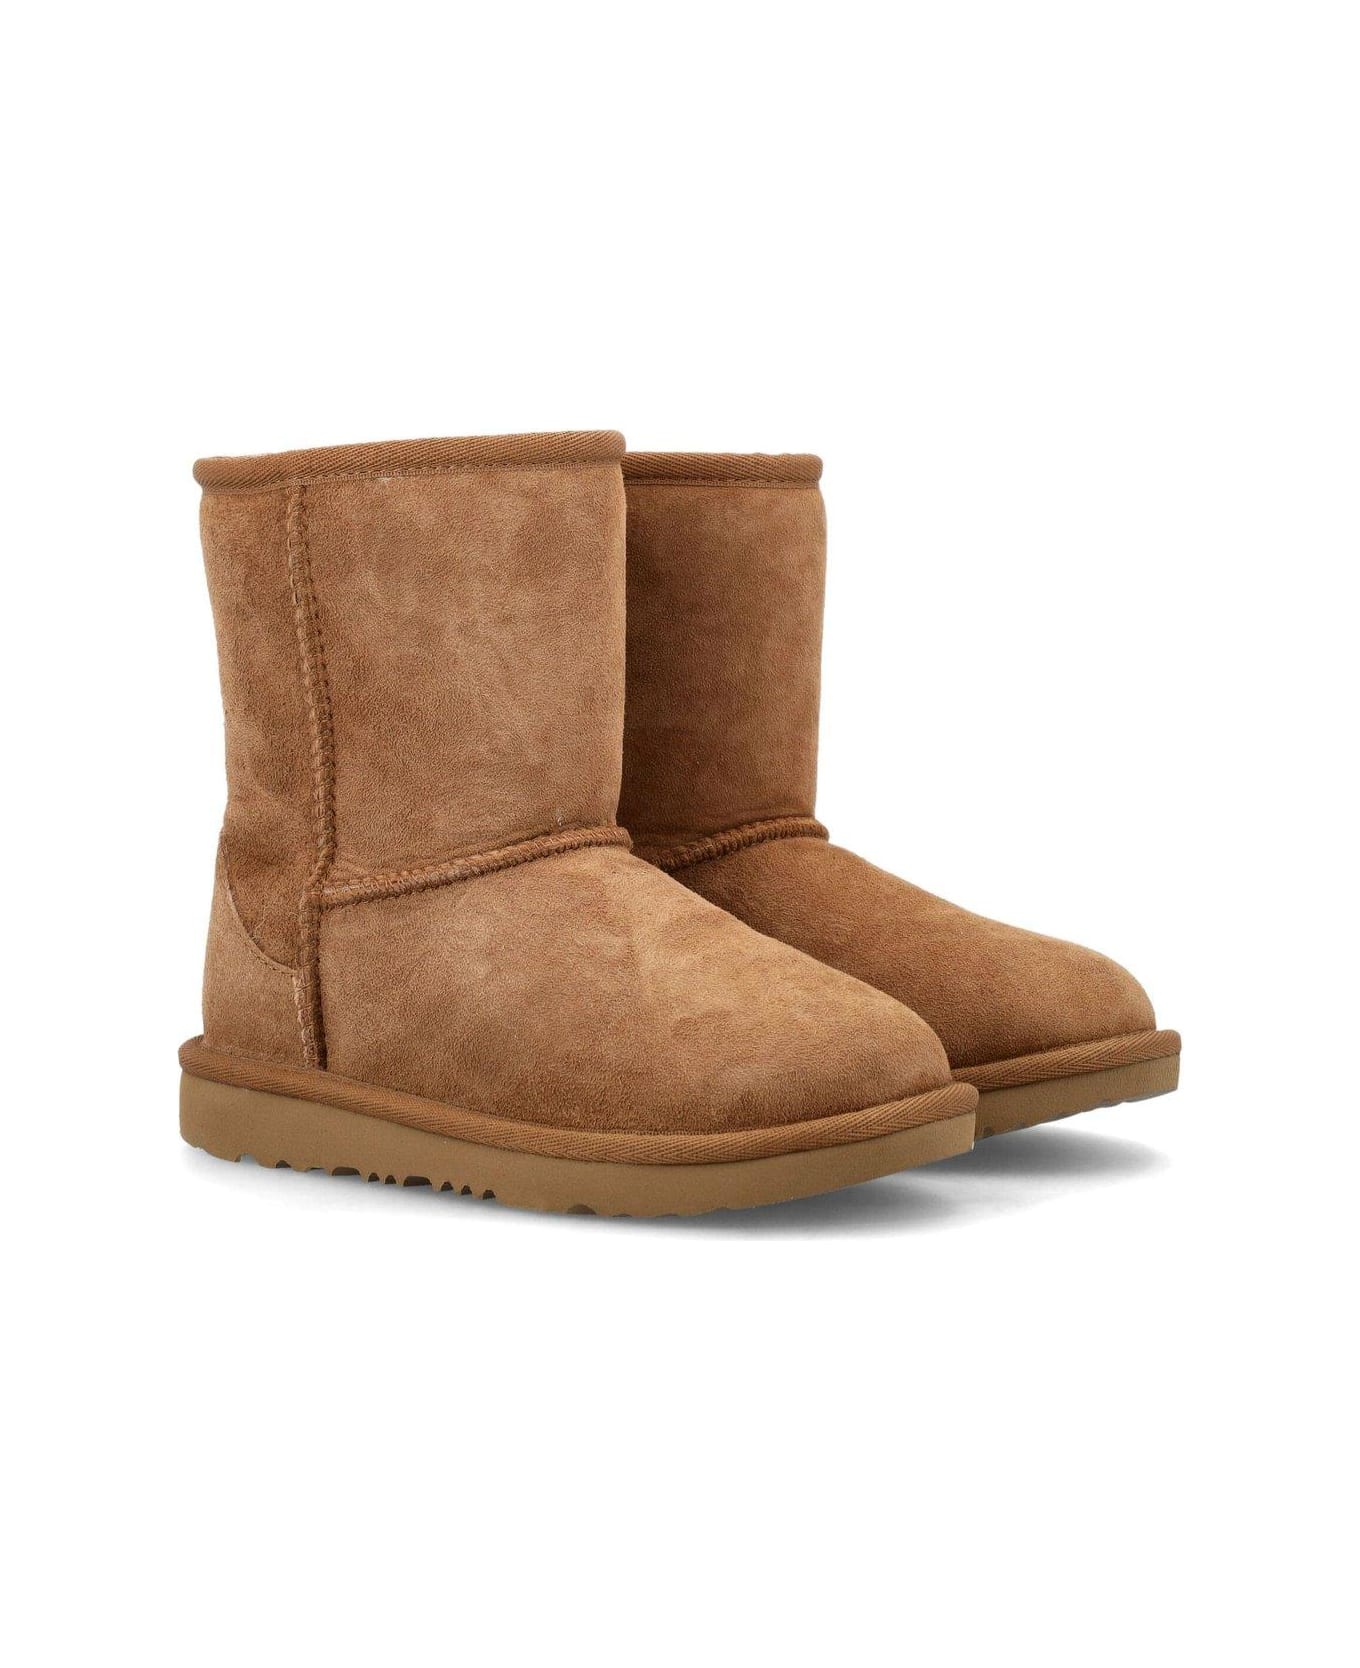 UGG Classic Ankle Boots - BROWN シューズ